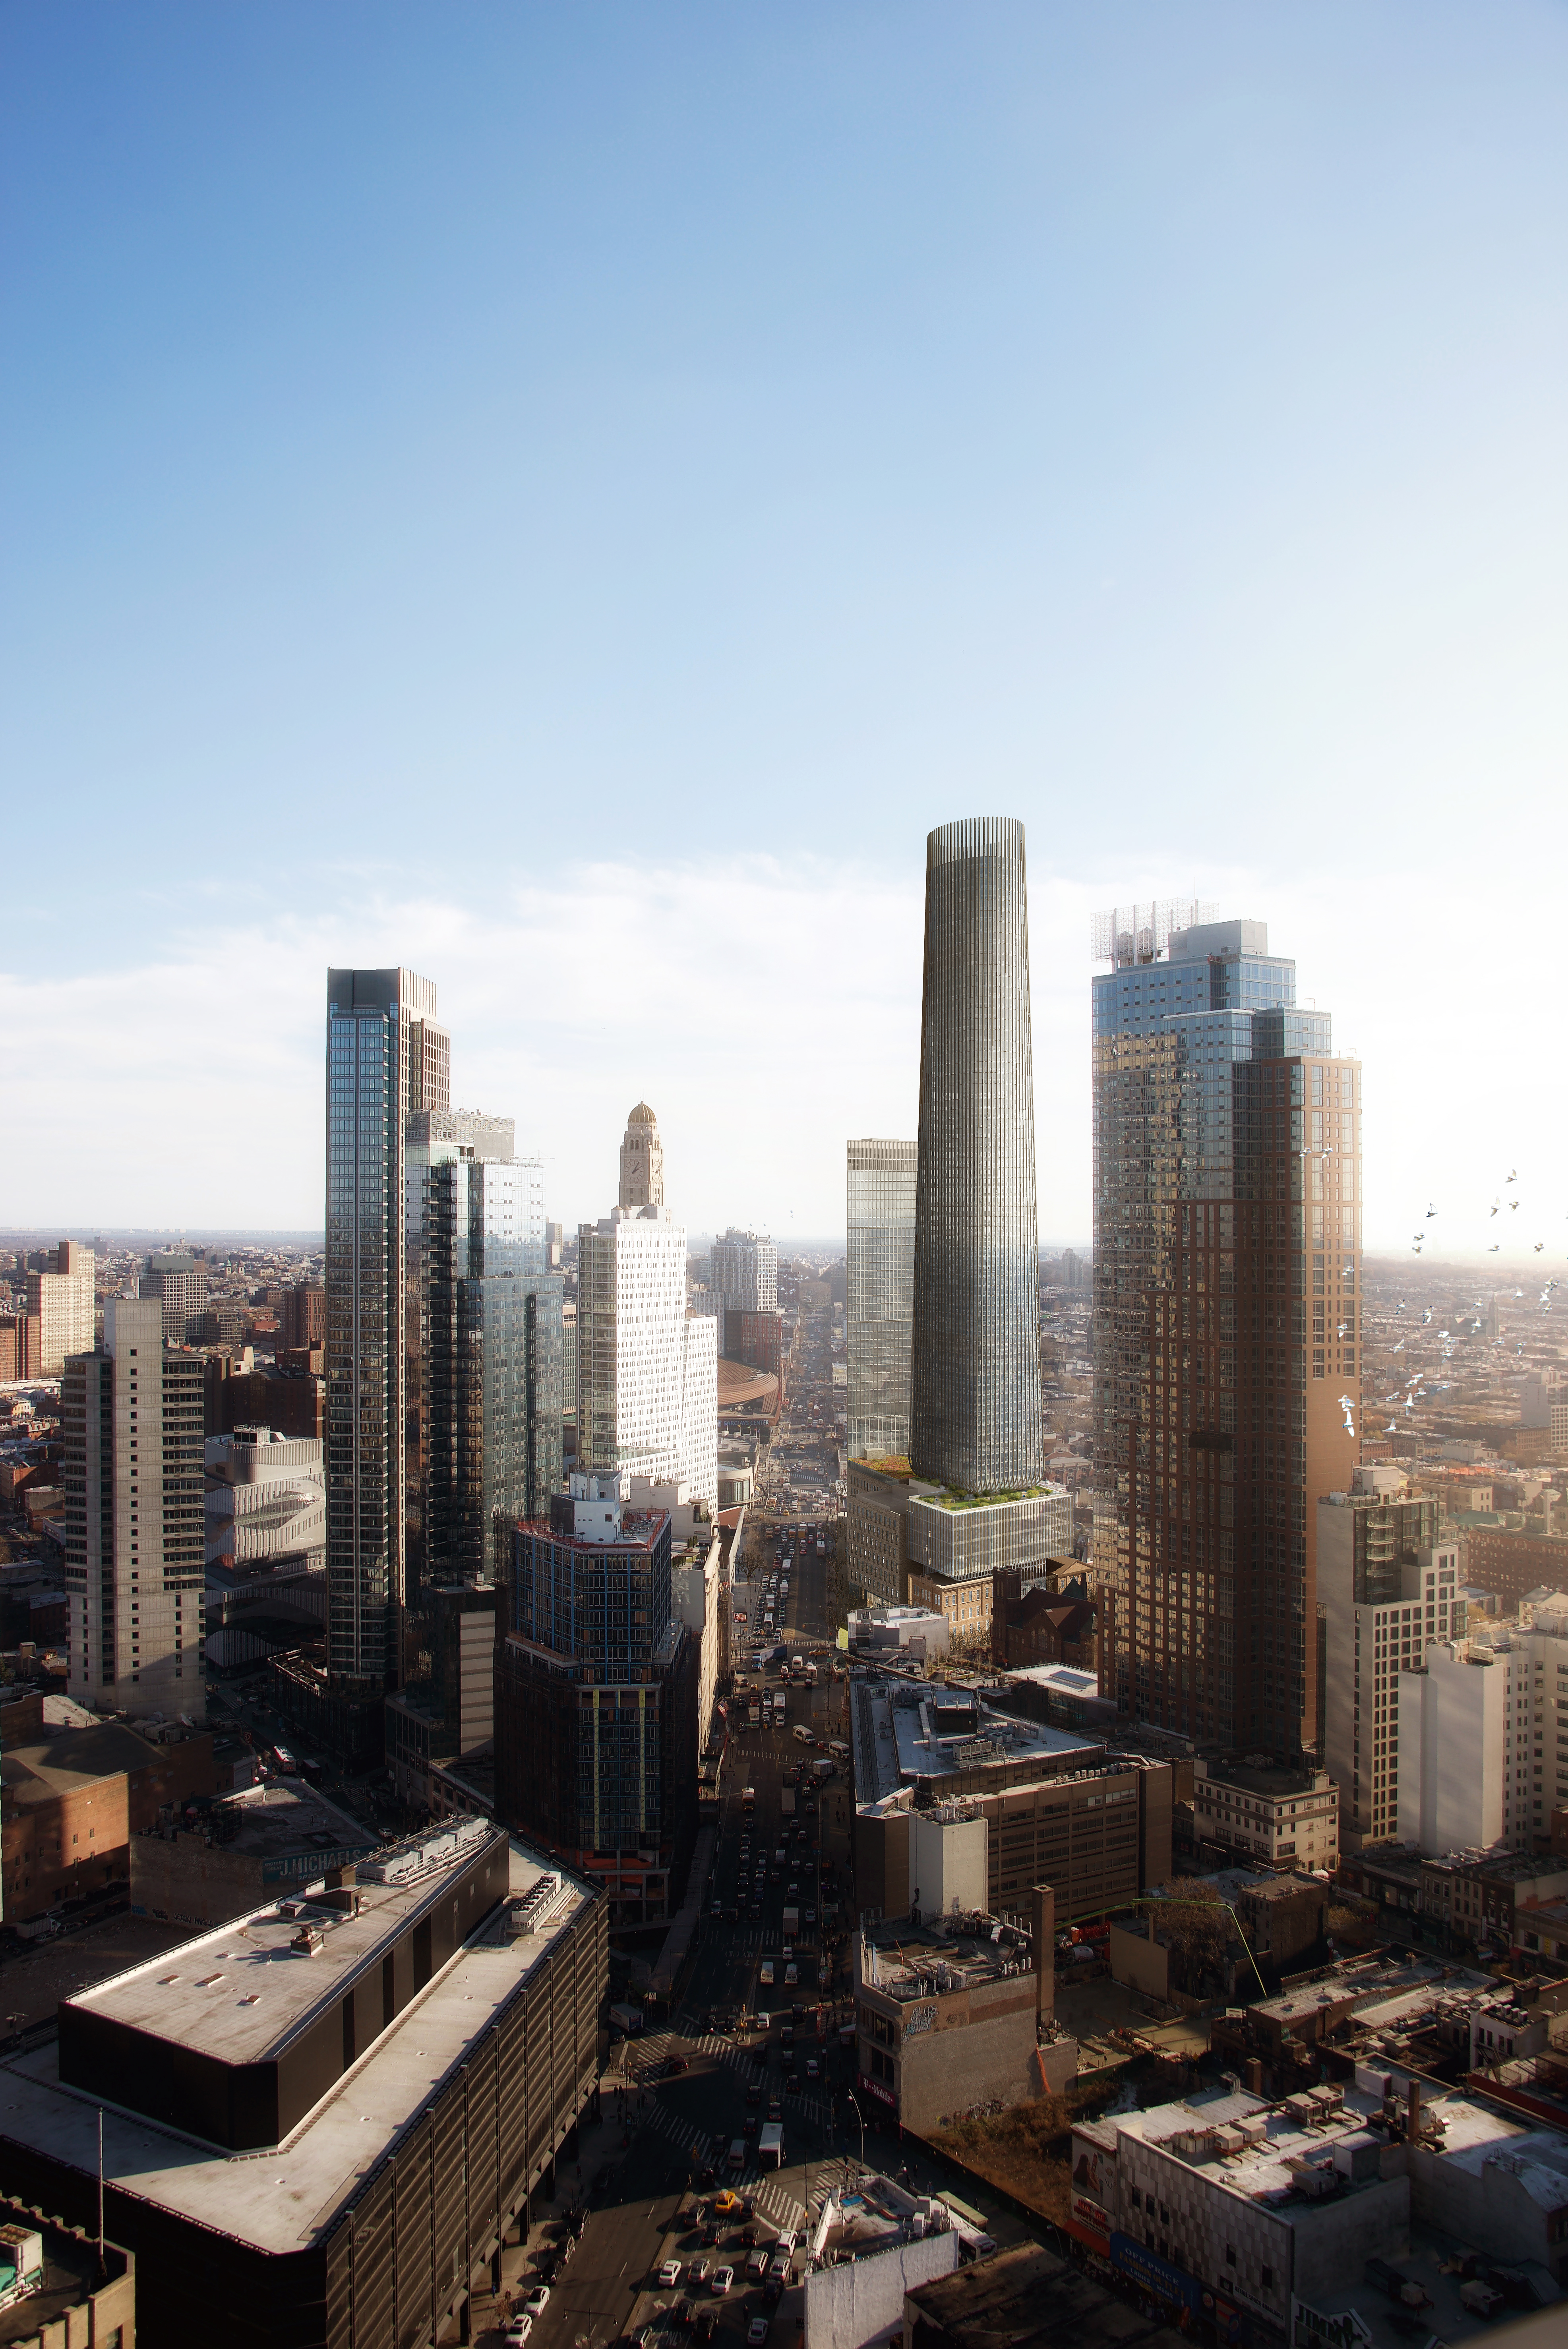 The City Council approved upzoning for 80 Flatbush Ave. last year. It’s the skyscraper across from the Williamsburgh Savings Bank. Rendering by Alloy Development/Luxigon